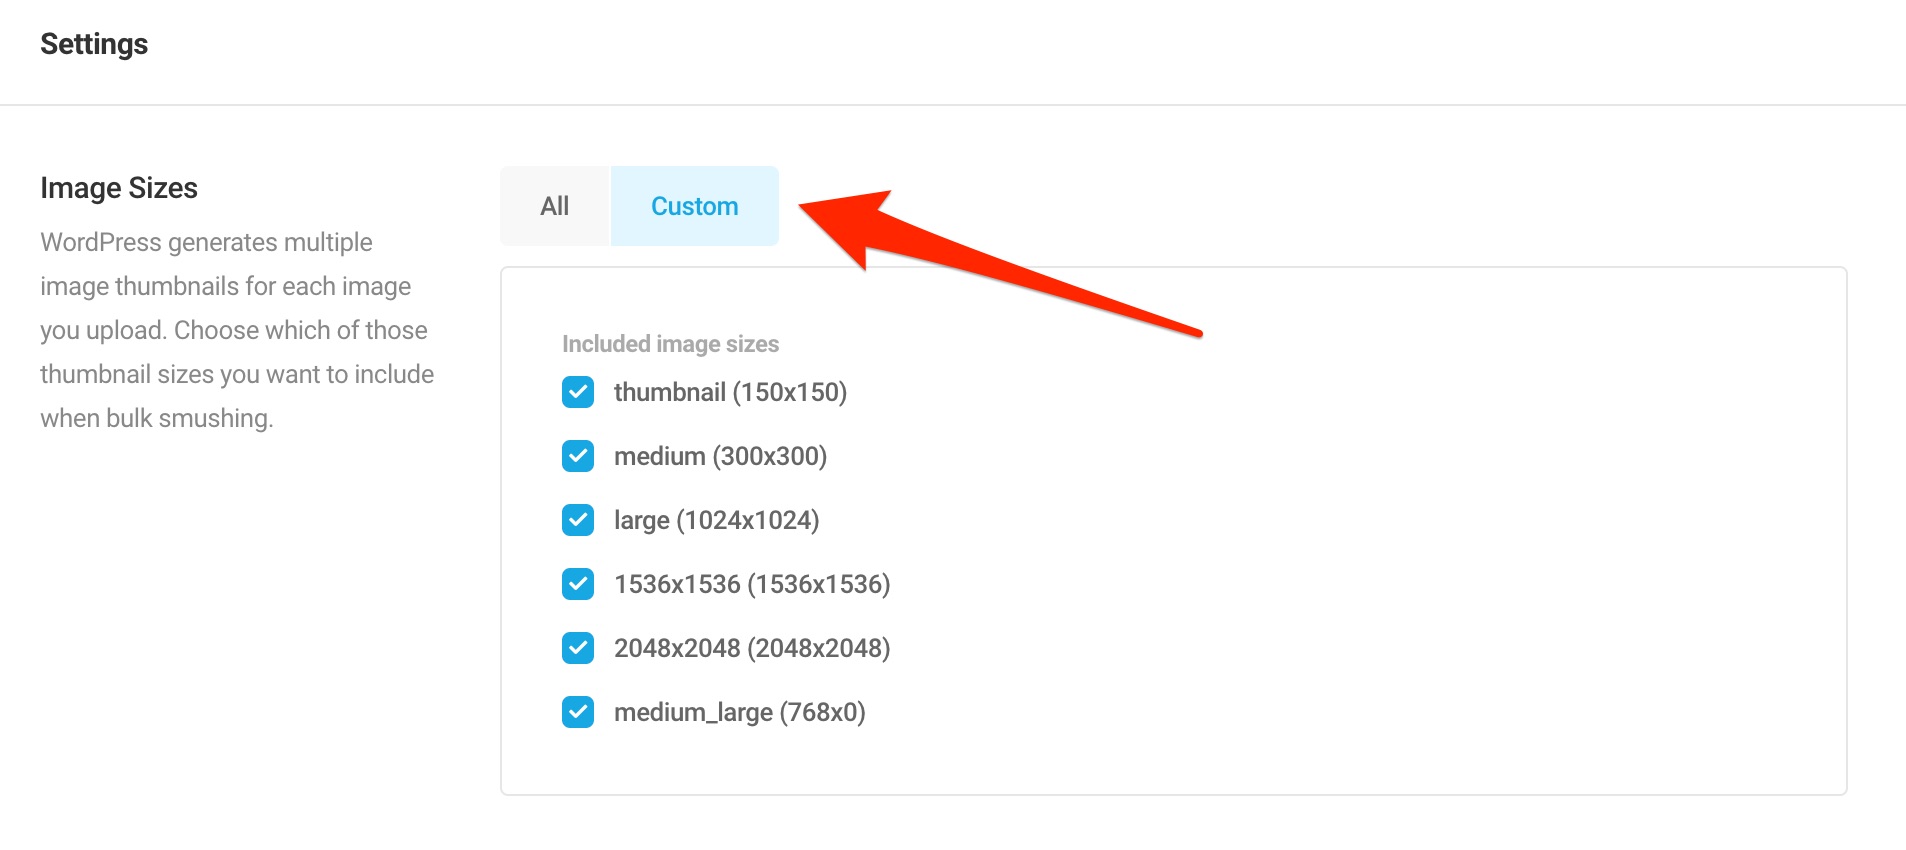 You can customize the image size that Smush compresses.